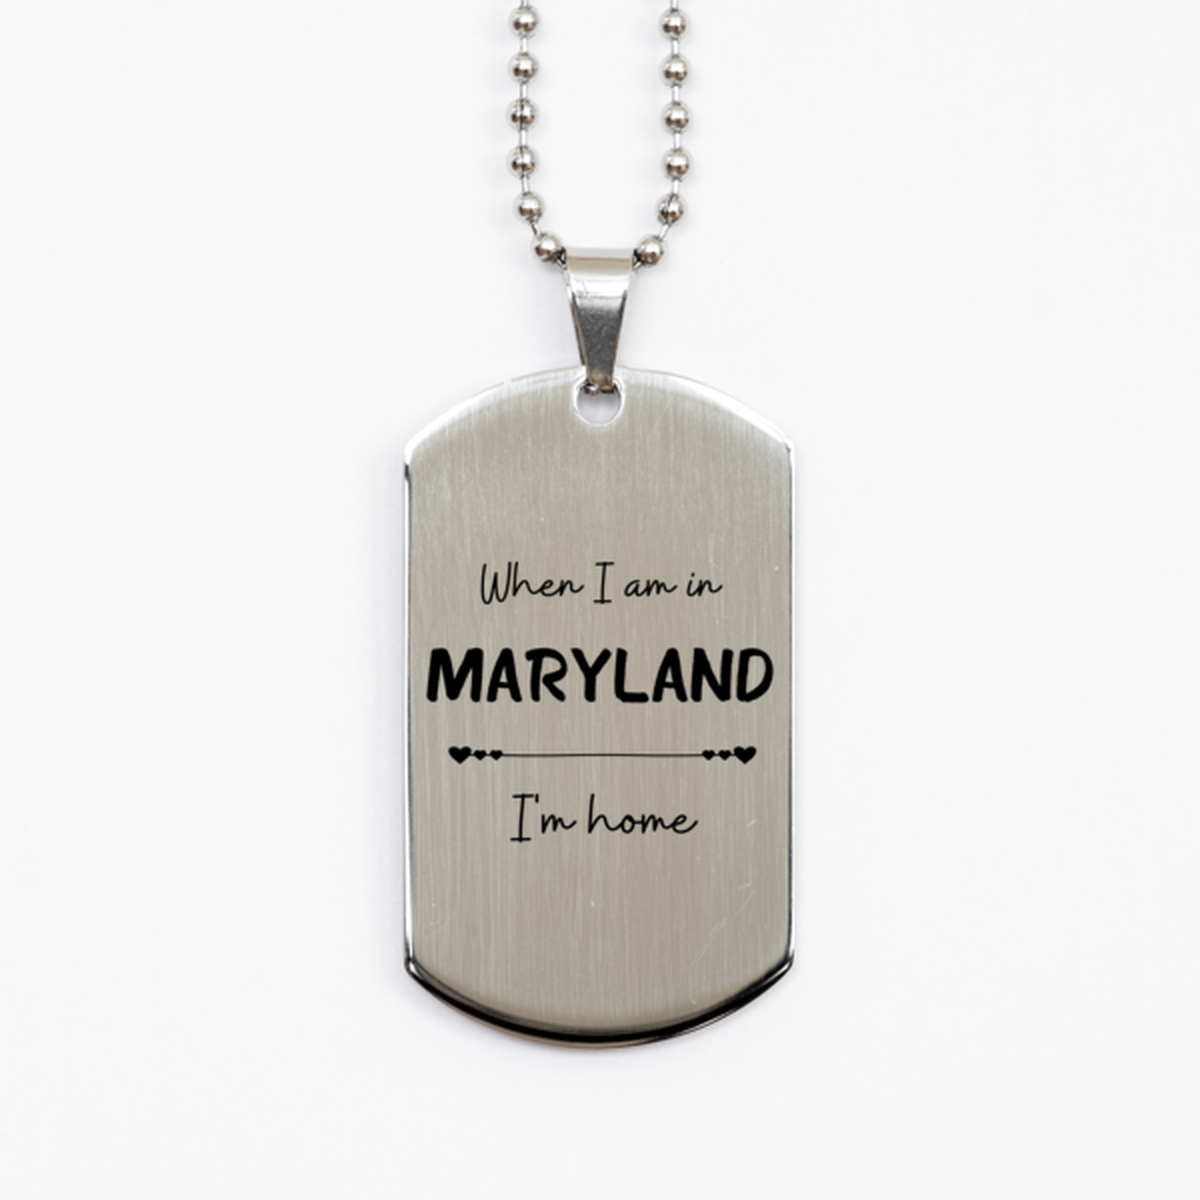 When I am in Maryland I'm home Silver Dog Tag, Cheap Gifts For Maryland, State Maryland Birthday Gifts for Friends Coworker